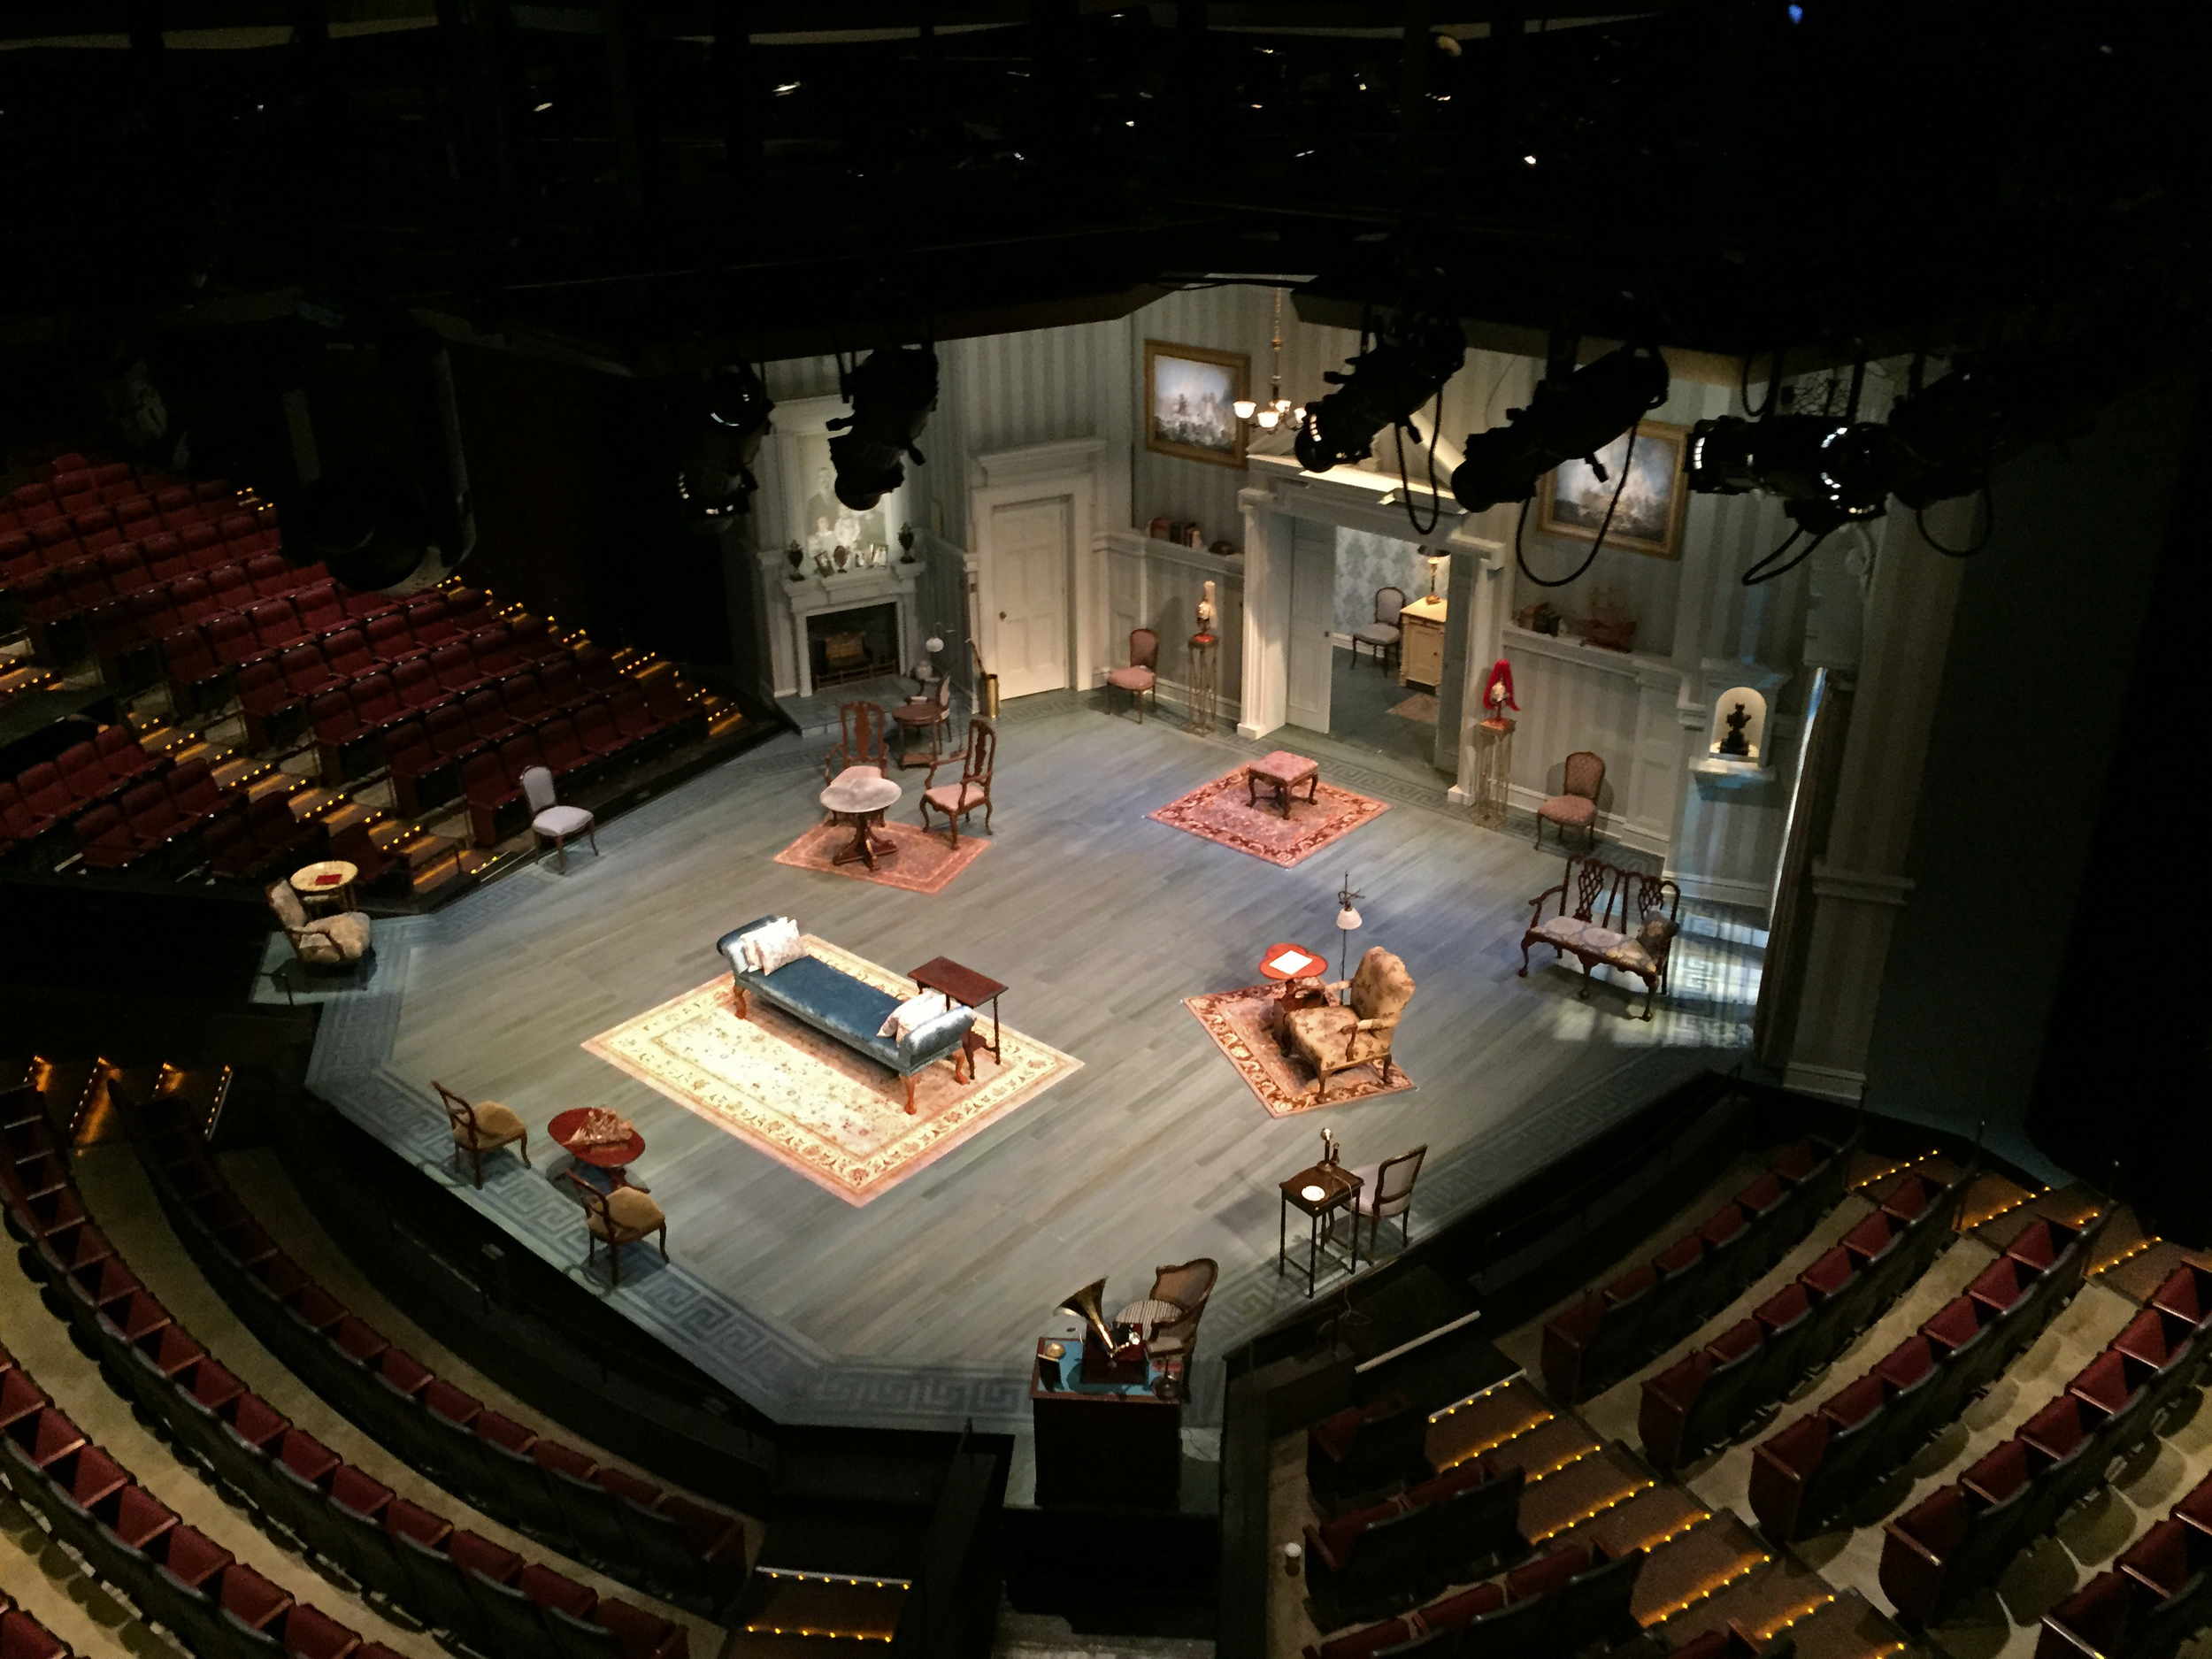 The Winslow Boy, Repertory Theatre of St Louis